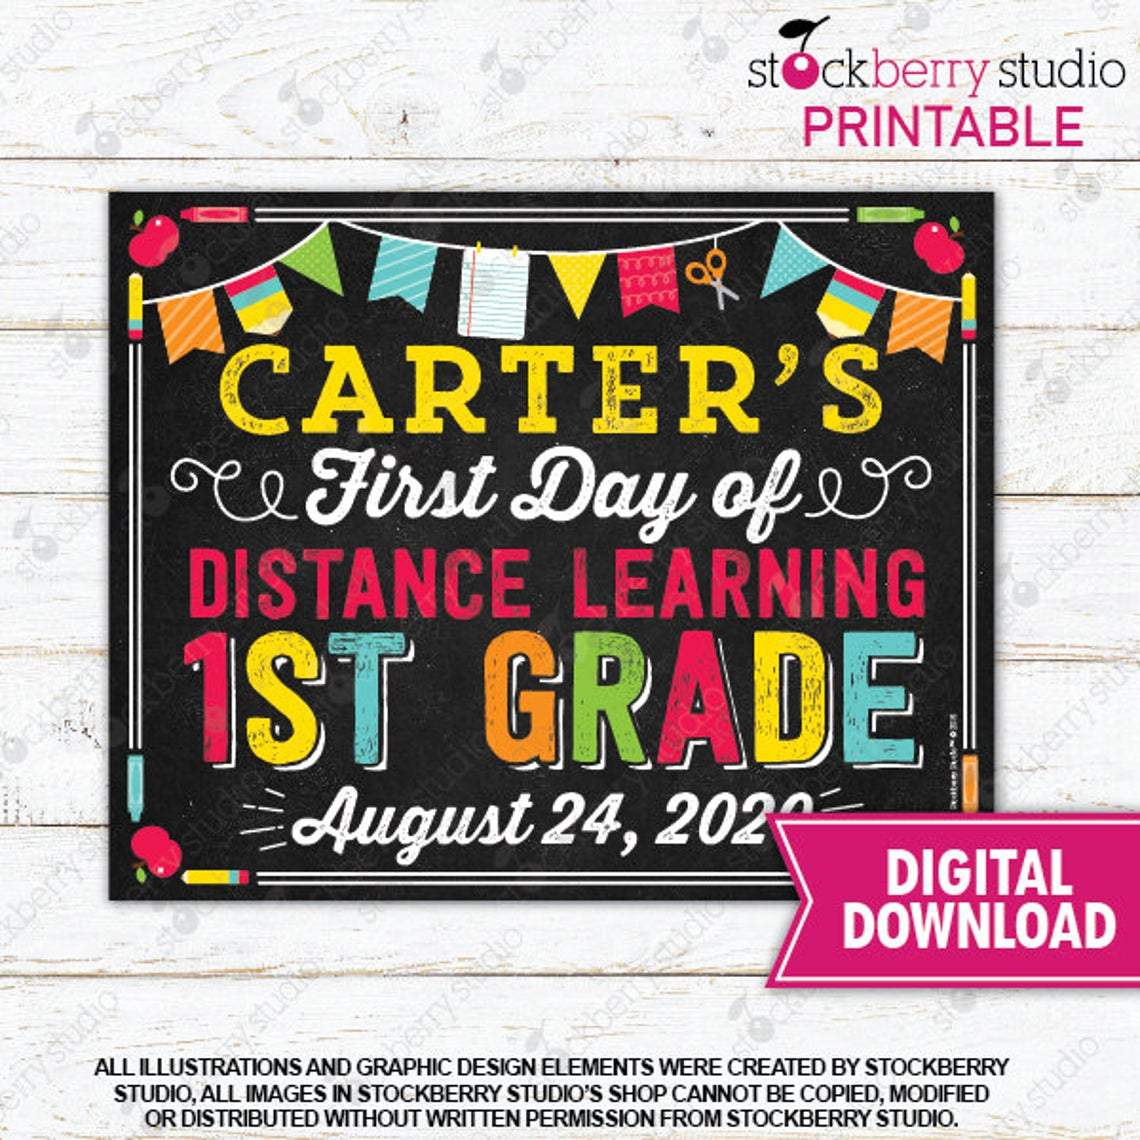 First Day of Virtual School Printable Sign E-learning